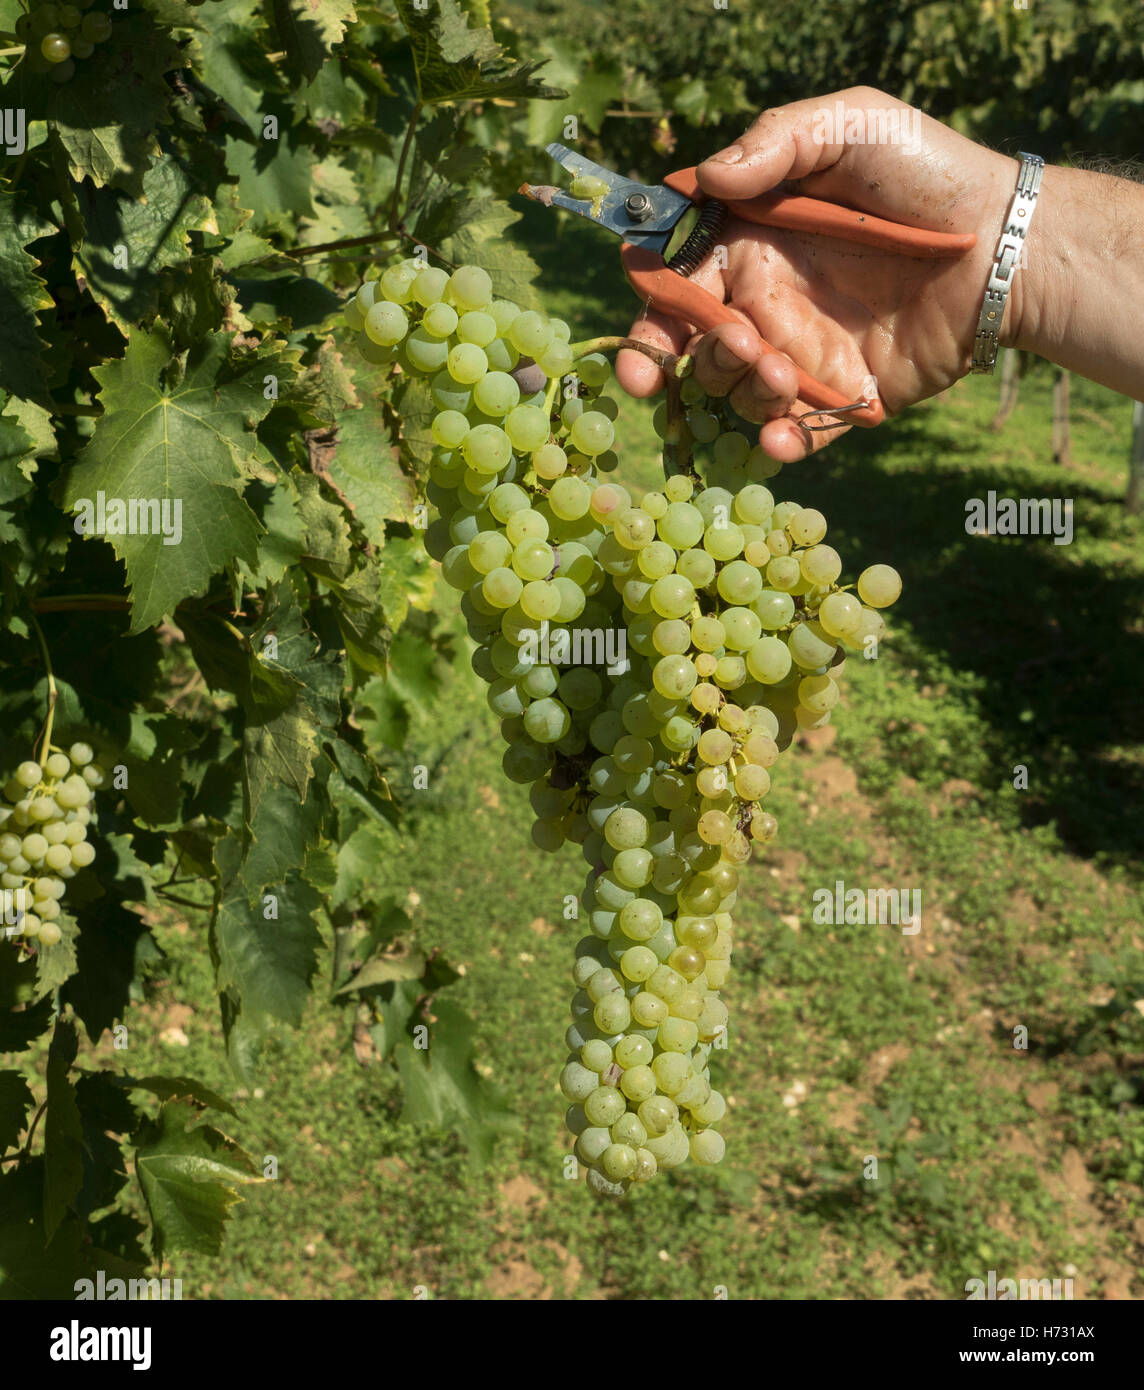 A harvester cutting a bunch of grapes with a pruning shears. Stock Photo